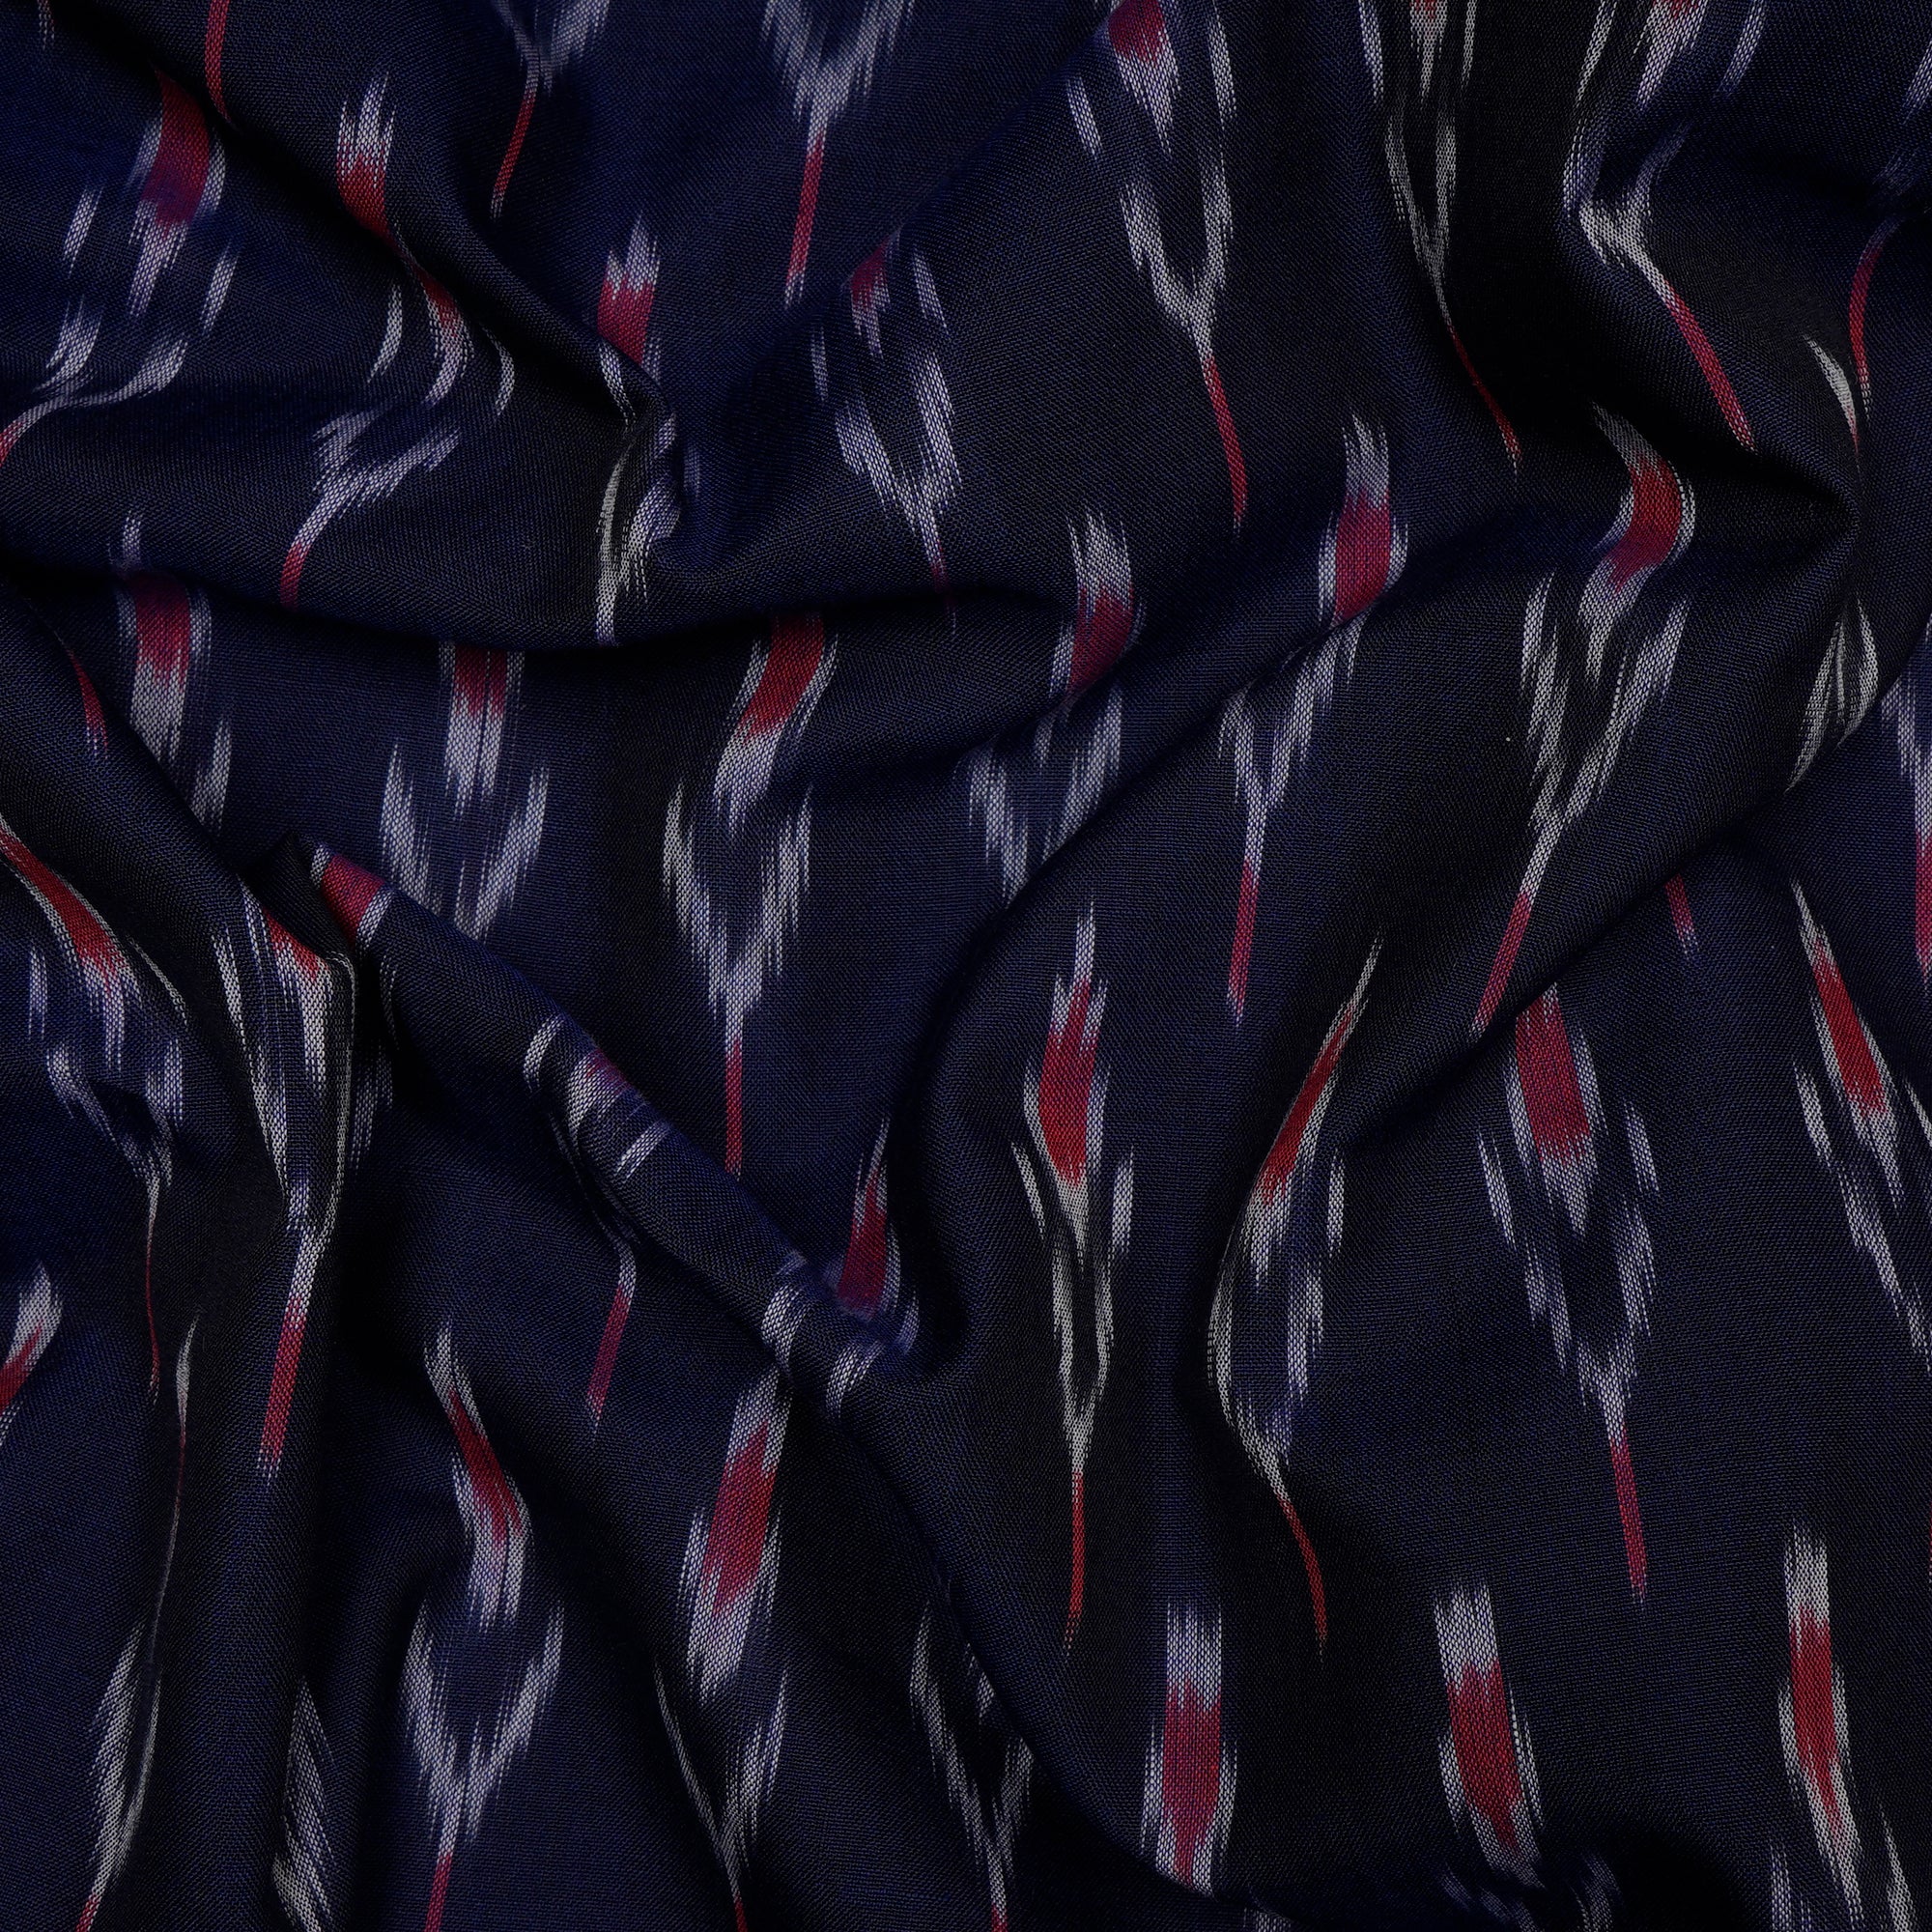 Voilet 2/120 Mercerized Washed Woven Ikat Cotton Fabric